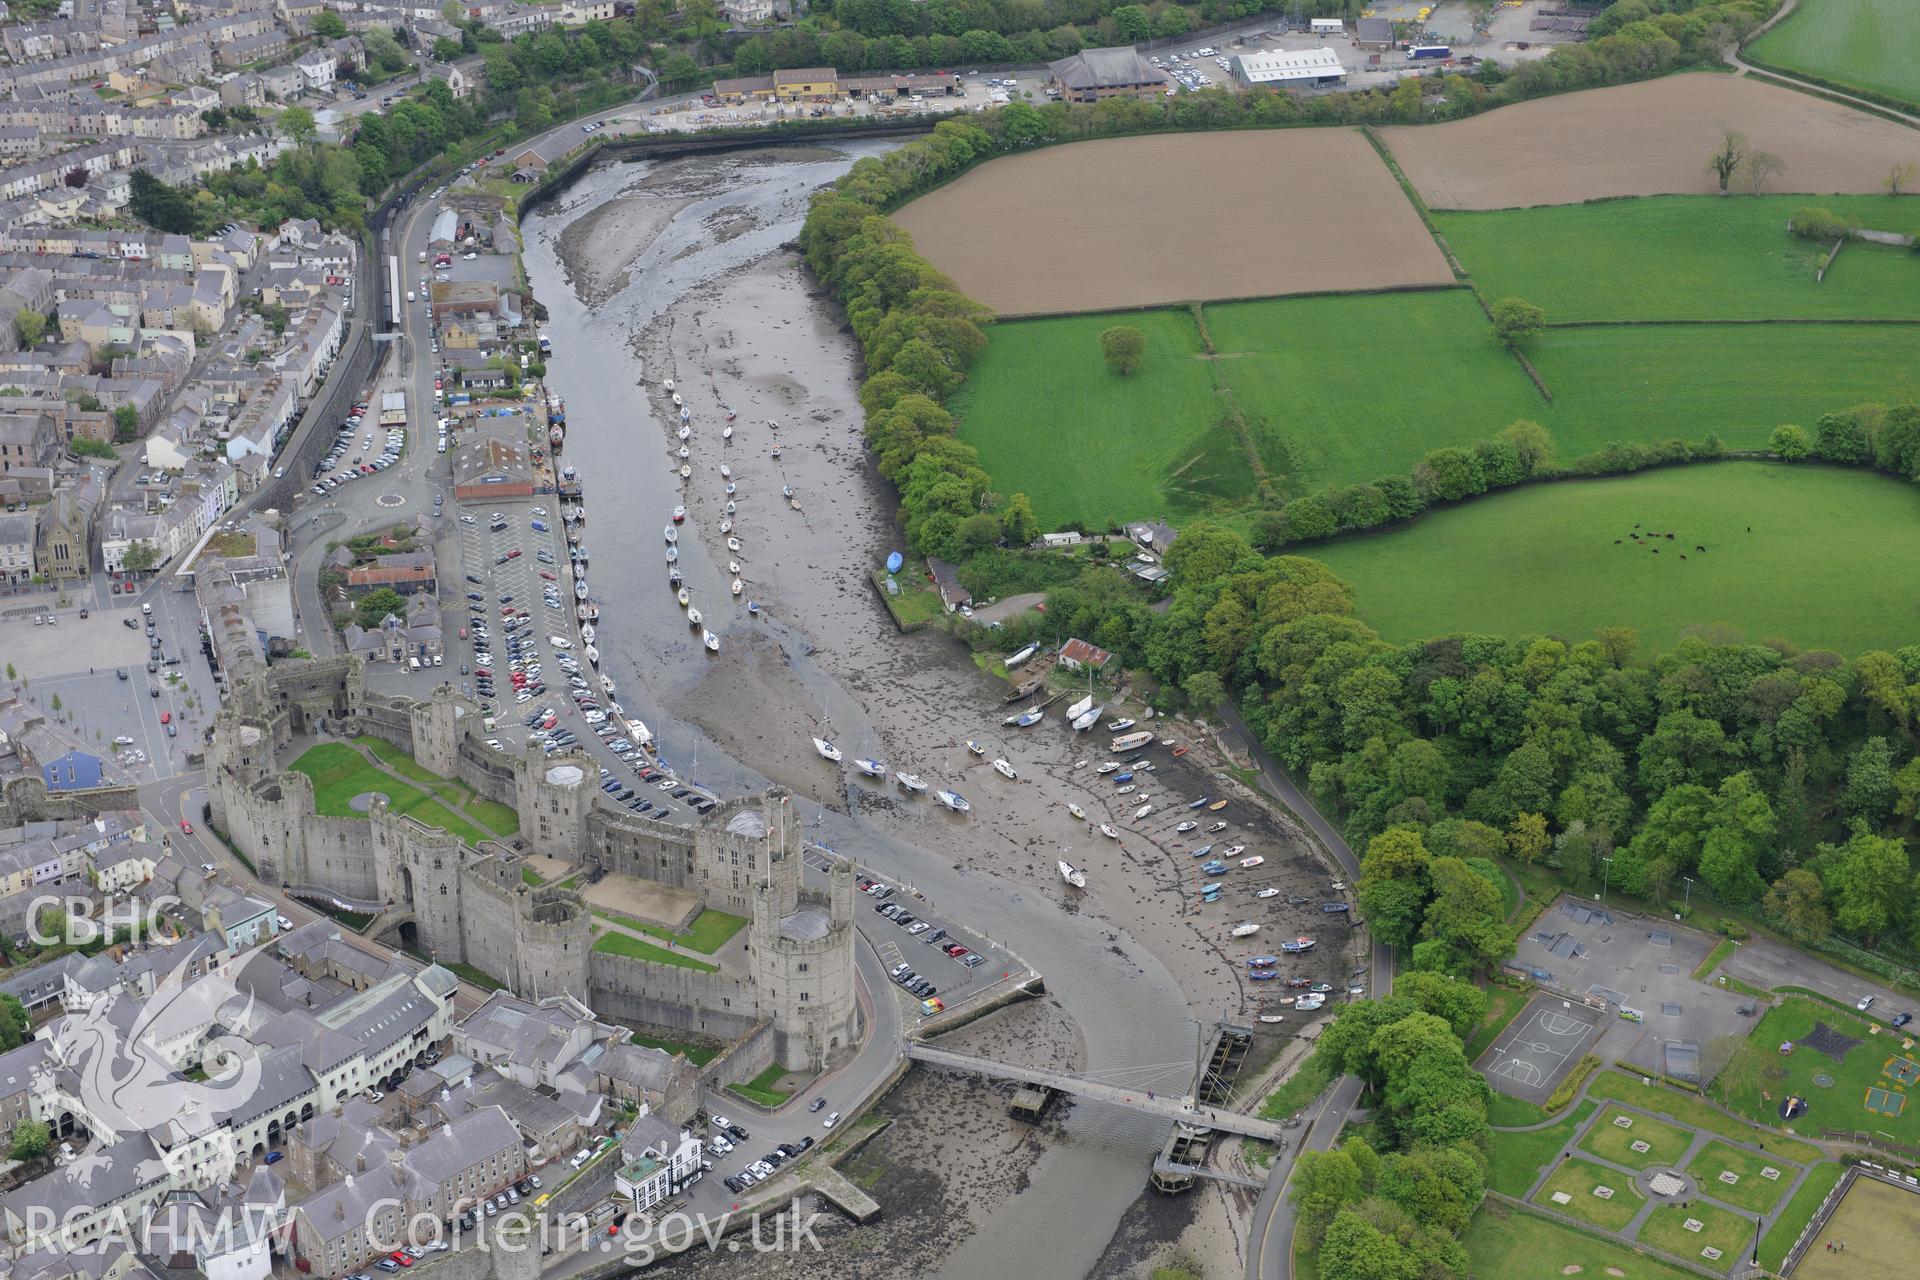 The town of Caernarfon, with the castle and the swing bridge visible. Oblique aerial photograph taken during the Royal Commission?s programme of archaeological aerial reconnaissance by Toby Driver on 22nd May 2013.